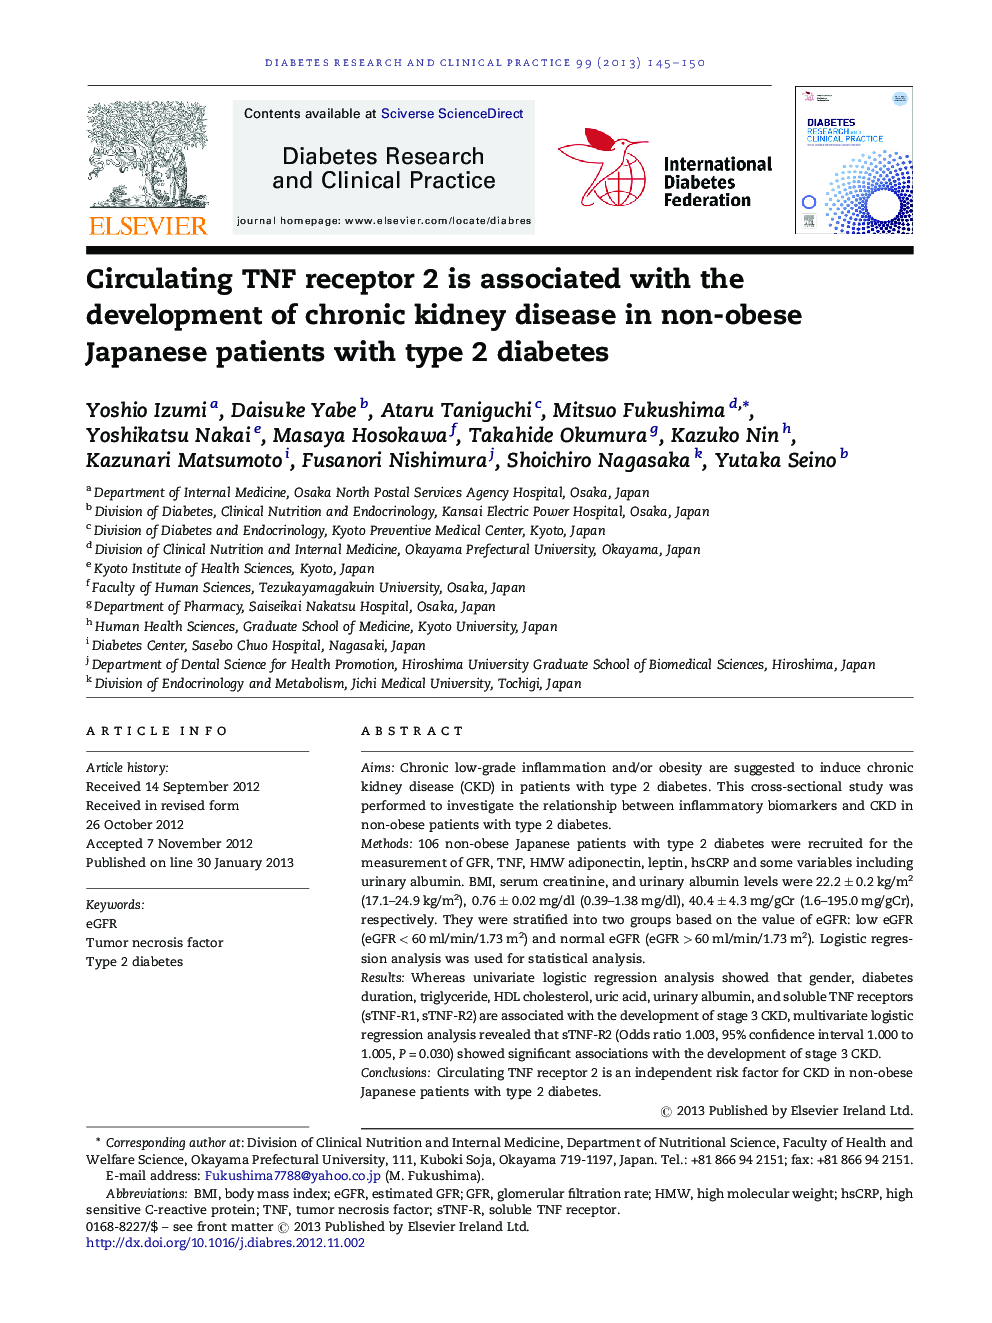 Circulating TNF receptor 2 is associated with the development of chronic kidney disease in non-obese Japanese patients with type 2 diabetes